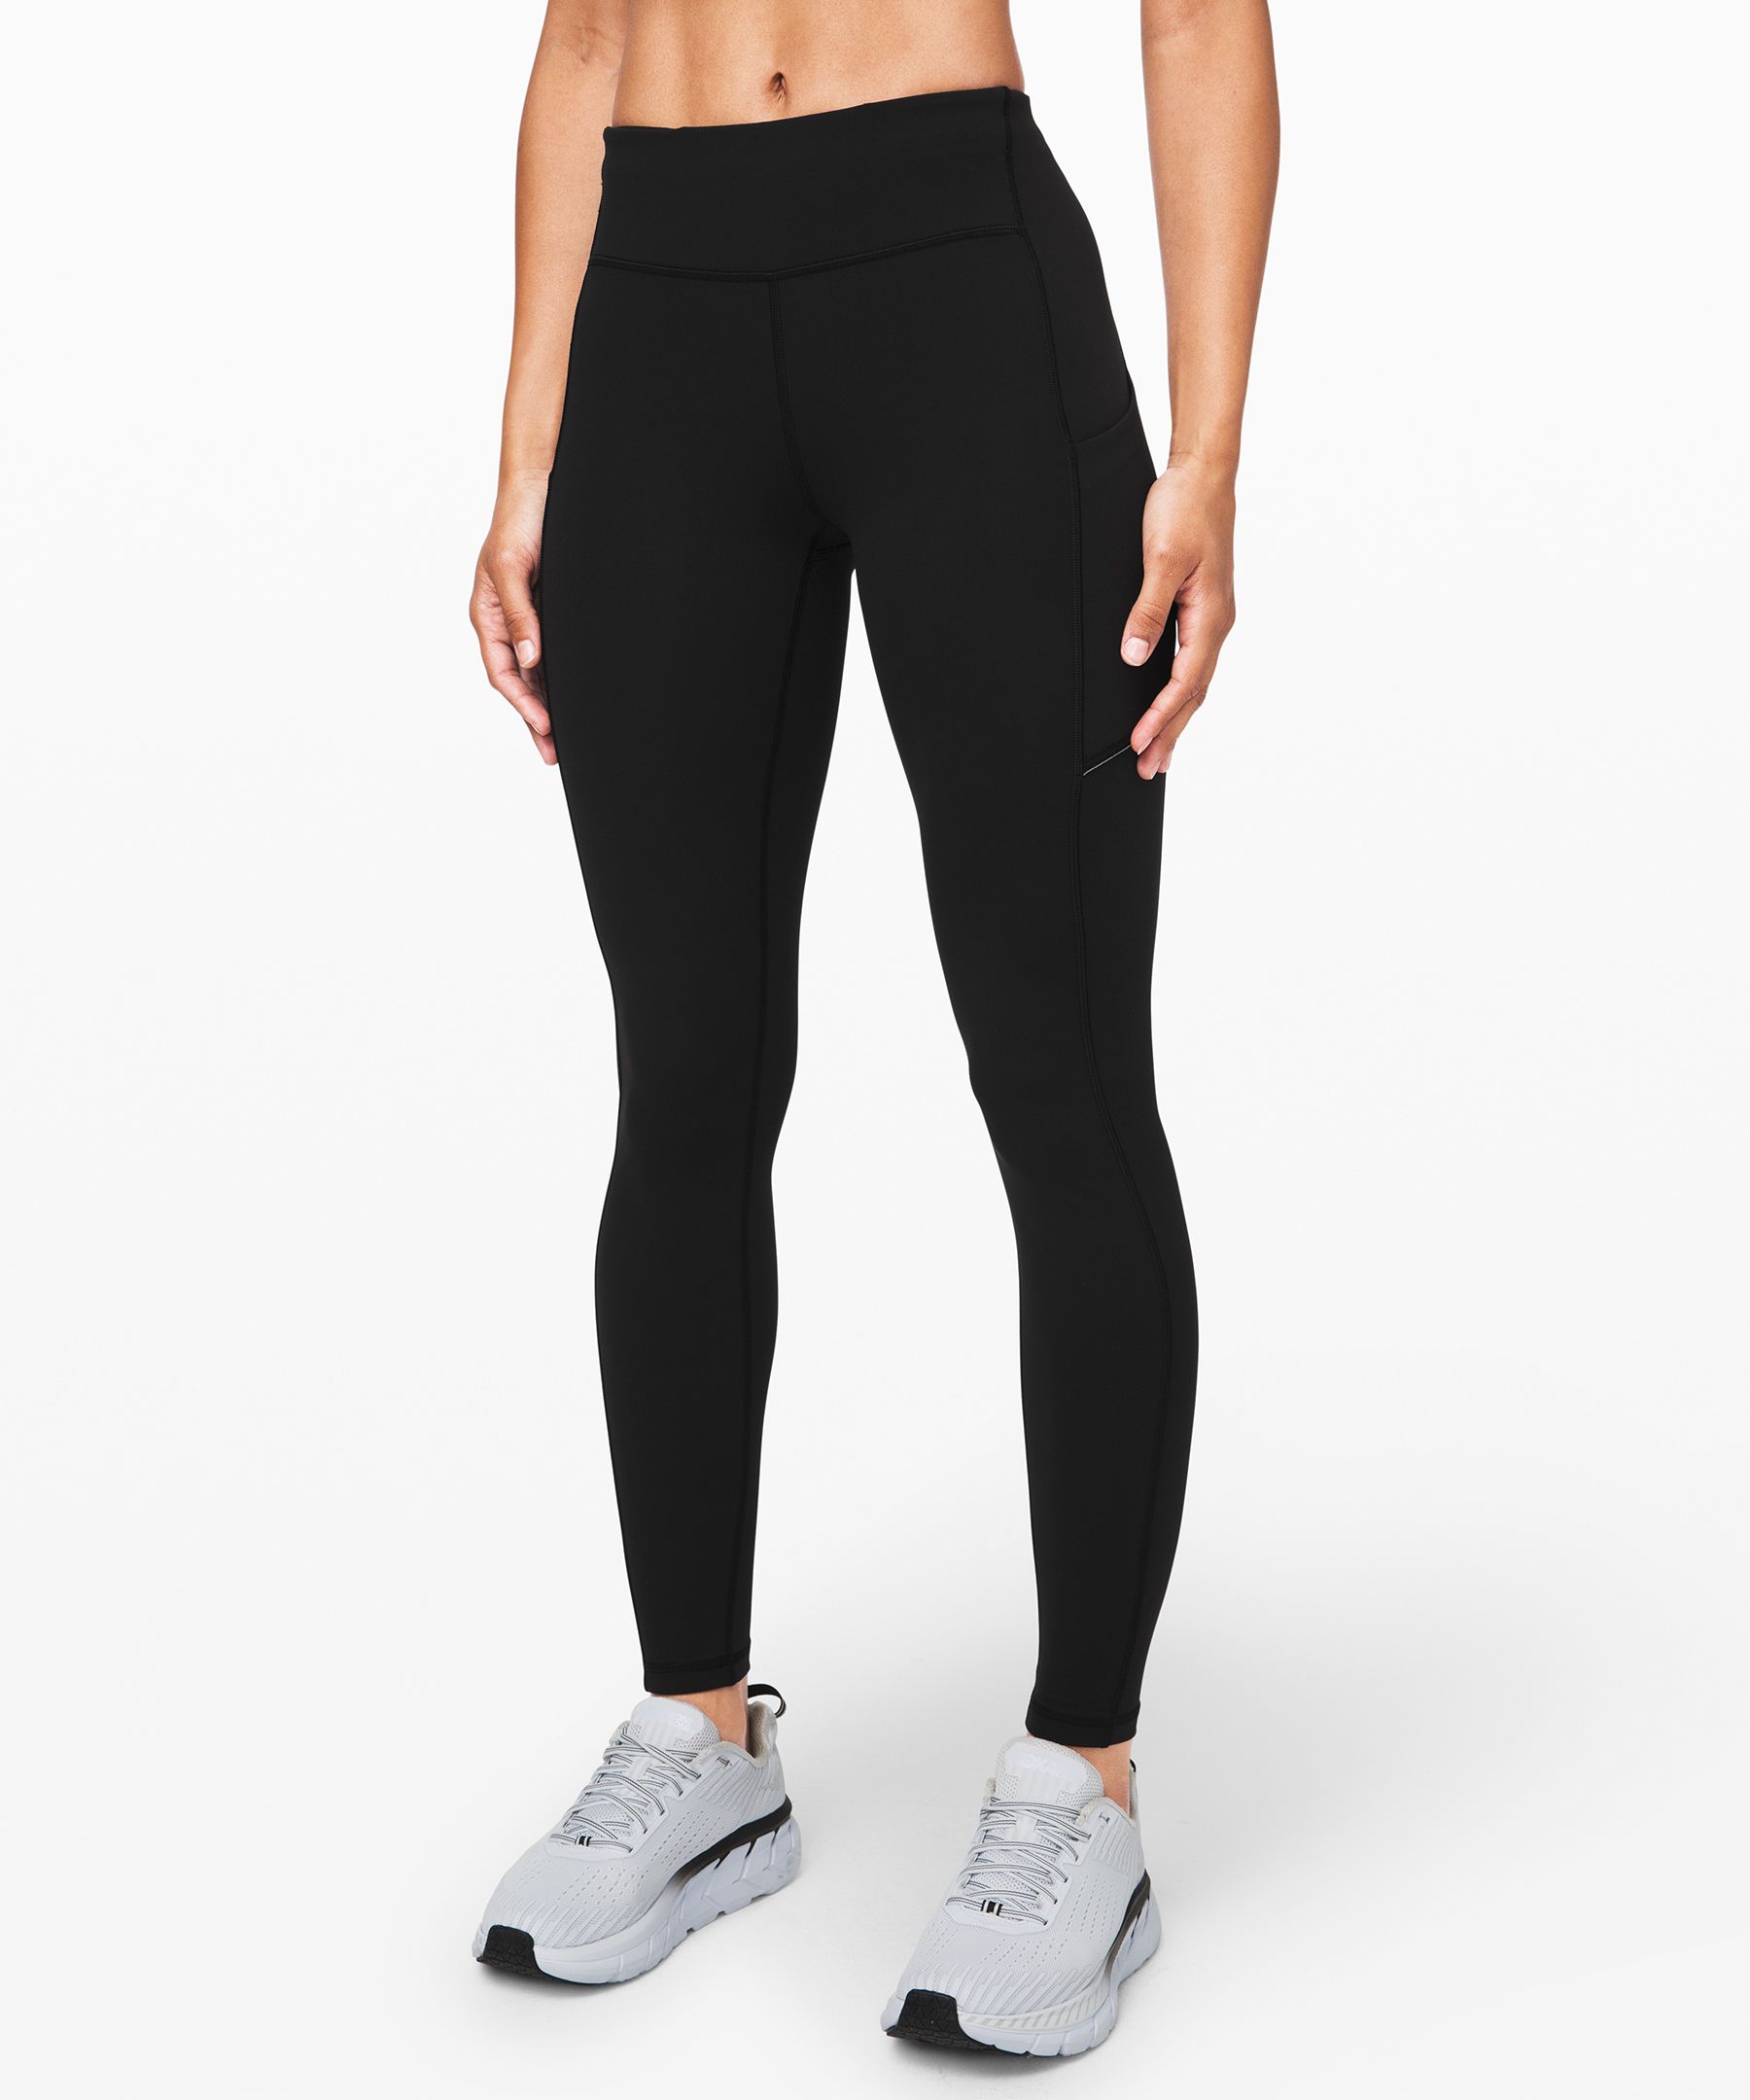 Lululemon Speed Up Mid-rise Tights 28" In Black